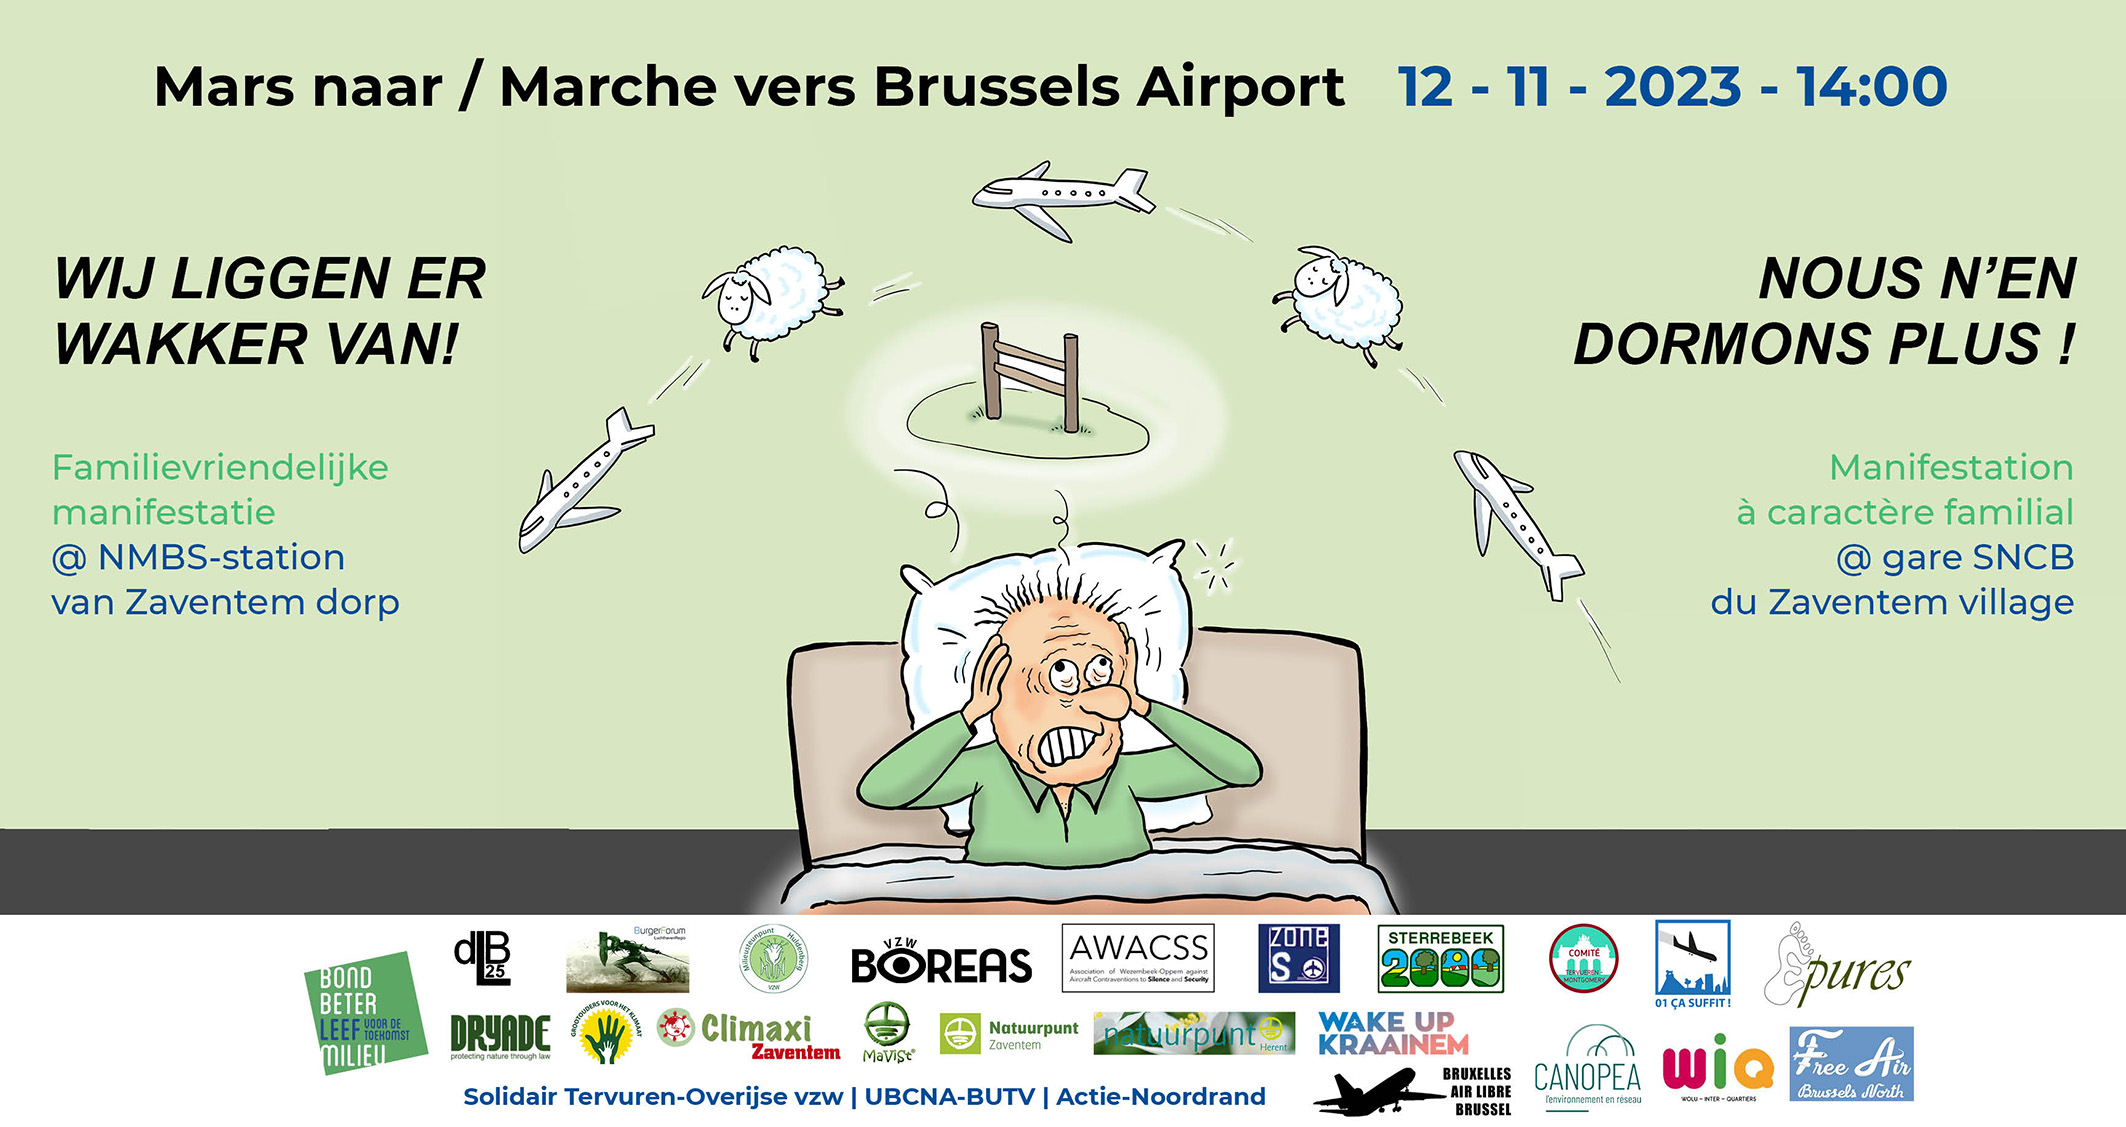 Marche vers Brussels Airport